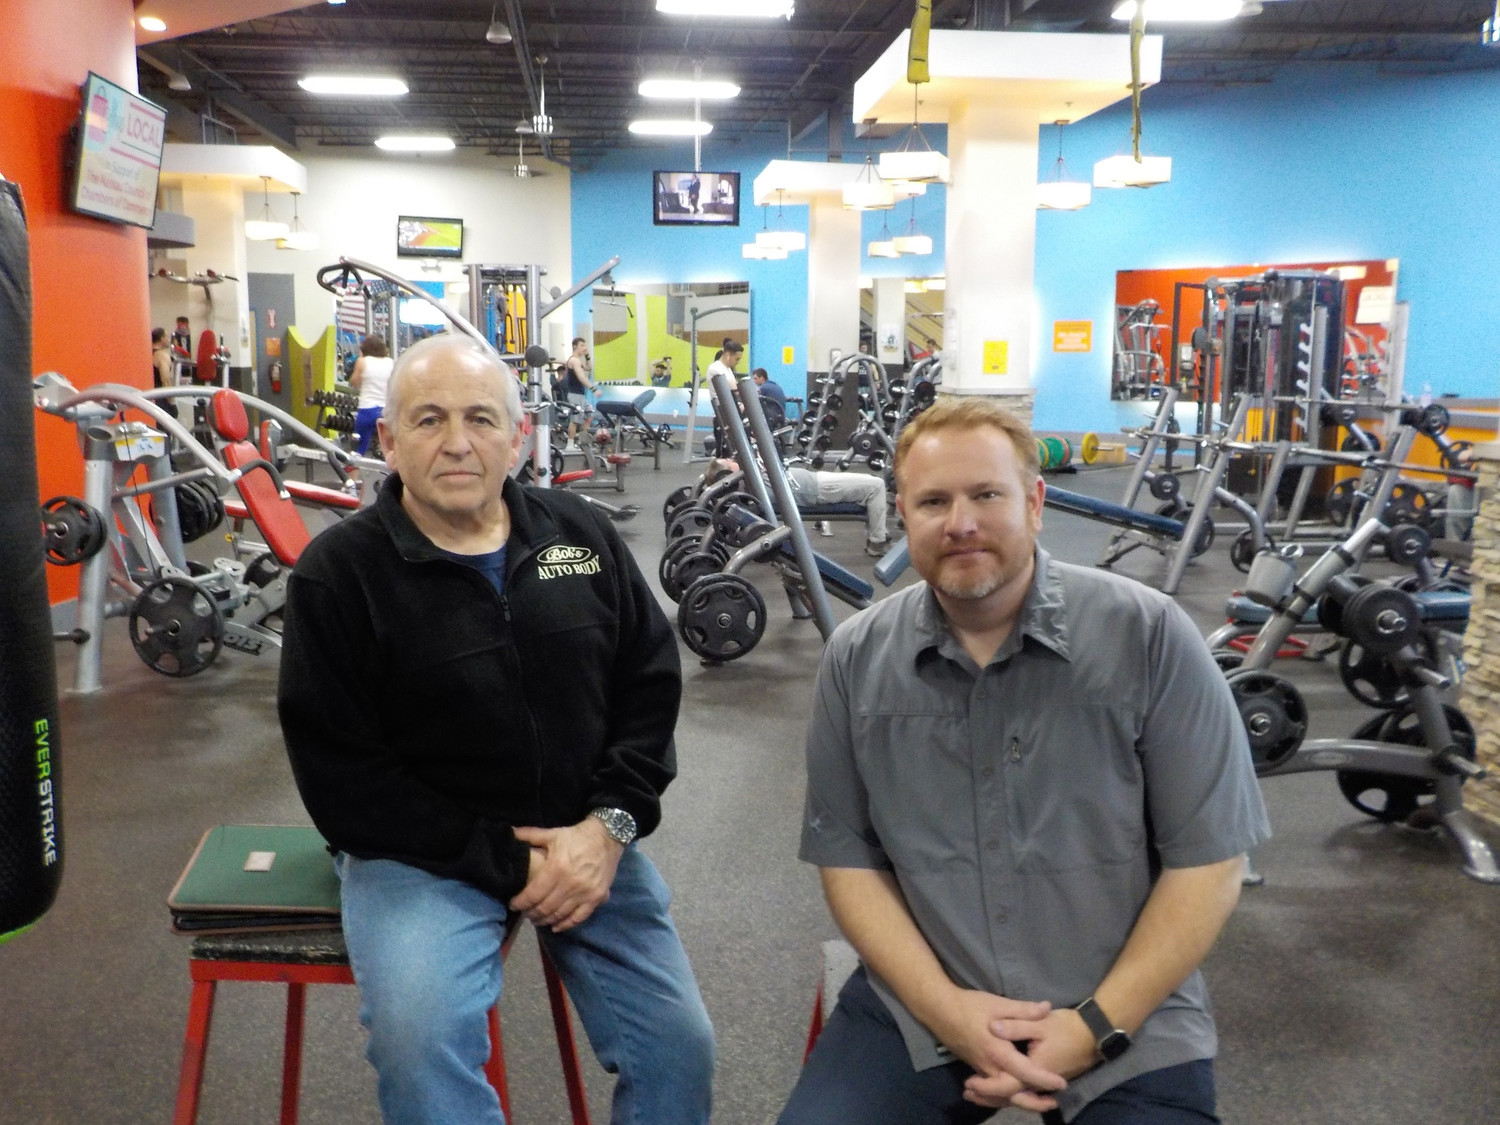 Mike Hawksby, right, who owns ROK Health & Fitness with Robert D’Urso, discovered neurotherapy after he sustained a head injury in a car crash. He is hoping to bring the practice into his gym in the near future.